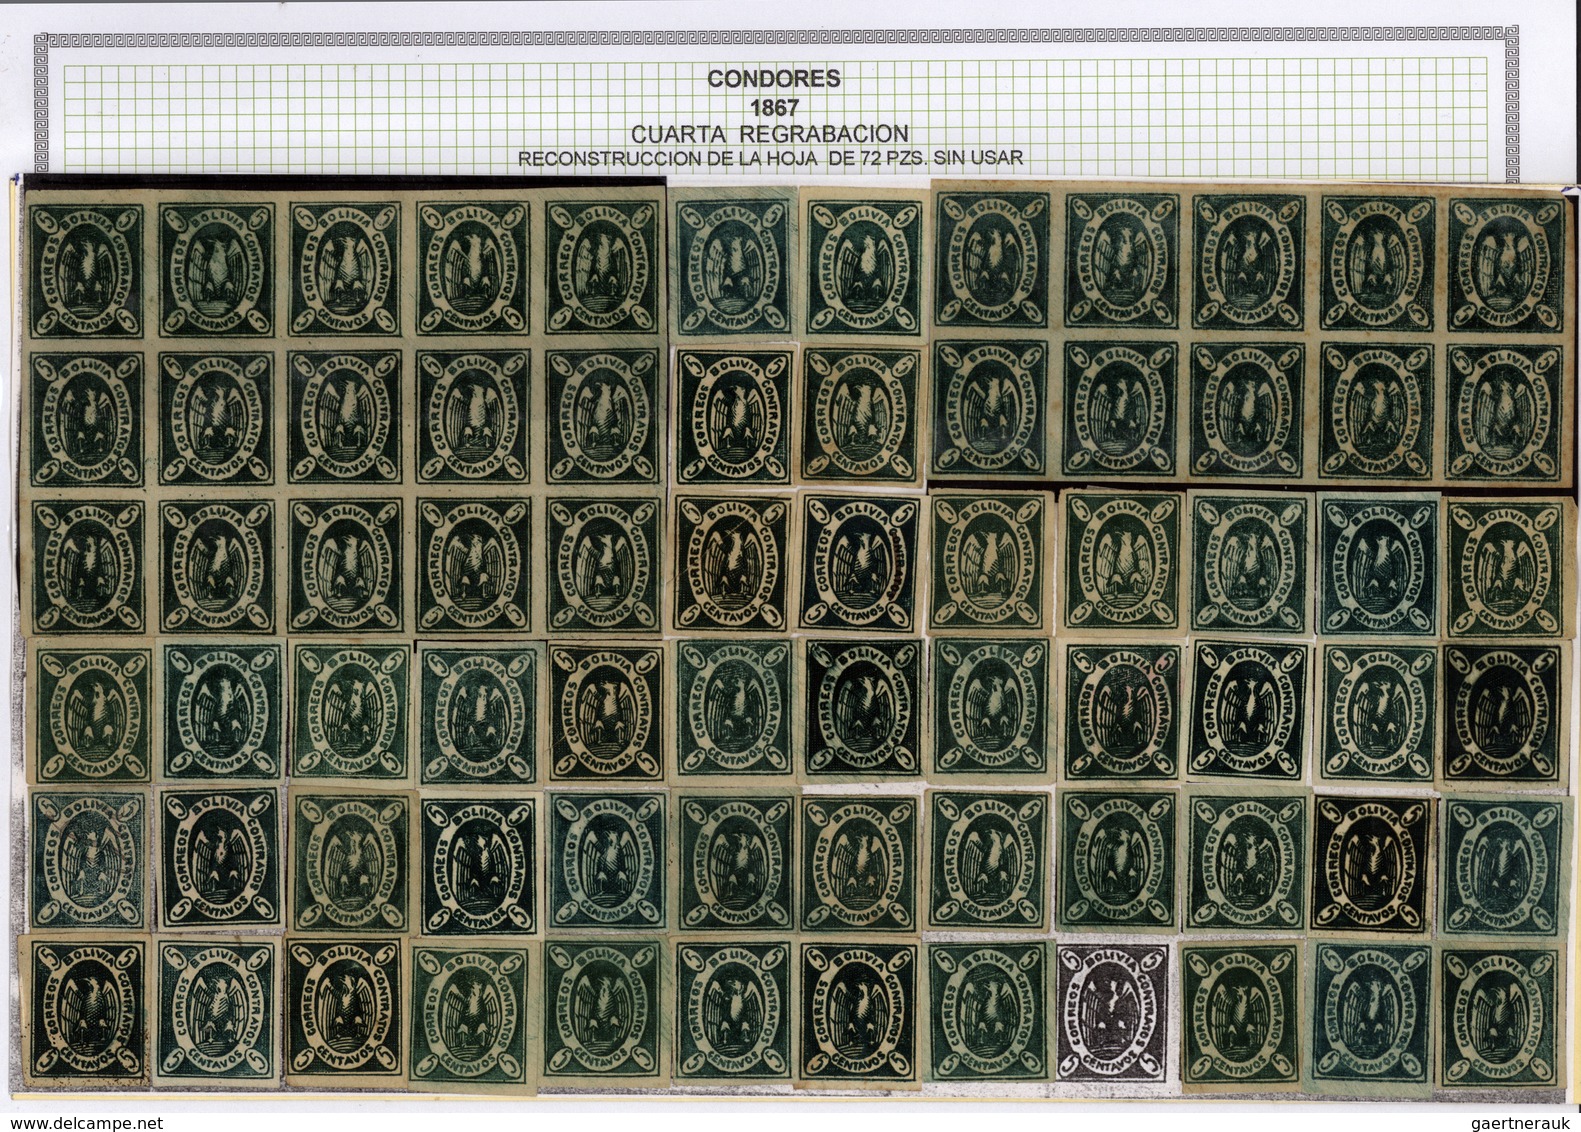 22274 Bolivien: 1867: THE CONDOR ISSUE: A scarce and unique special collection of a most exciting classica